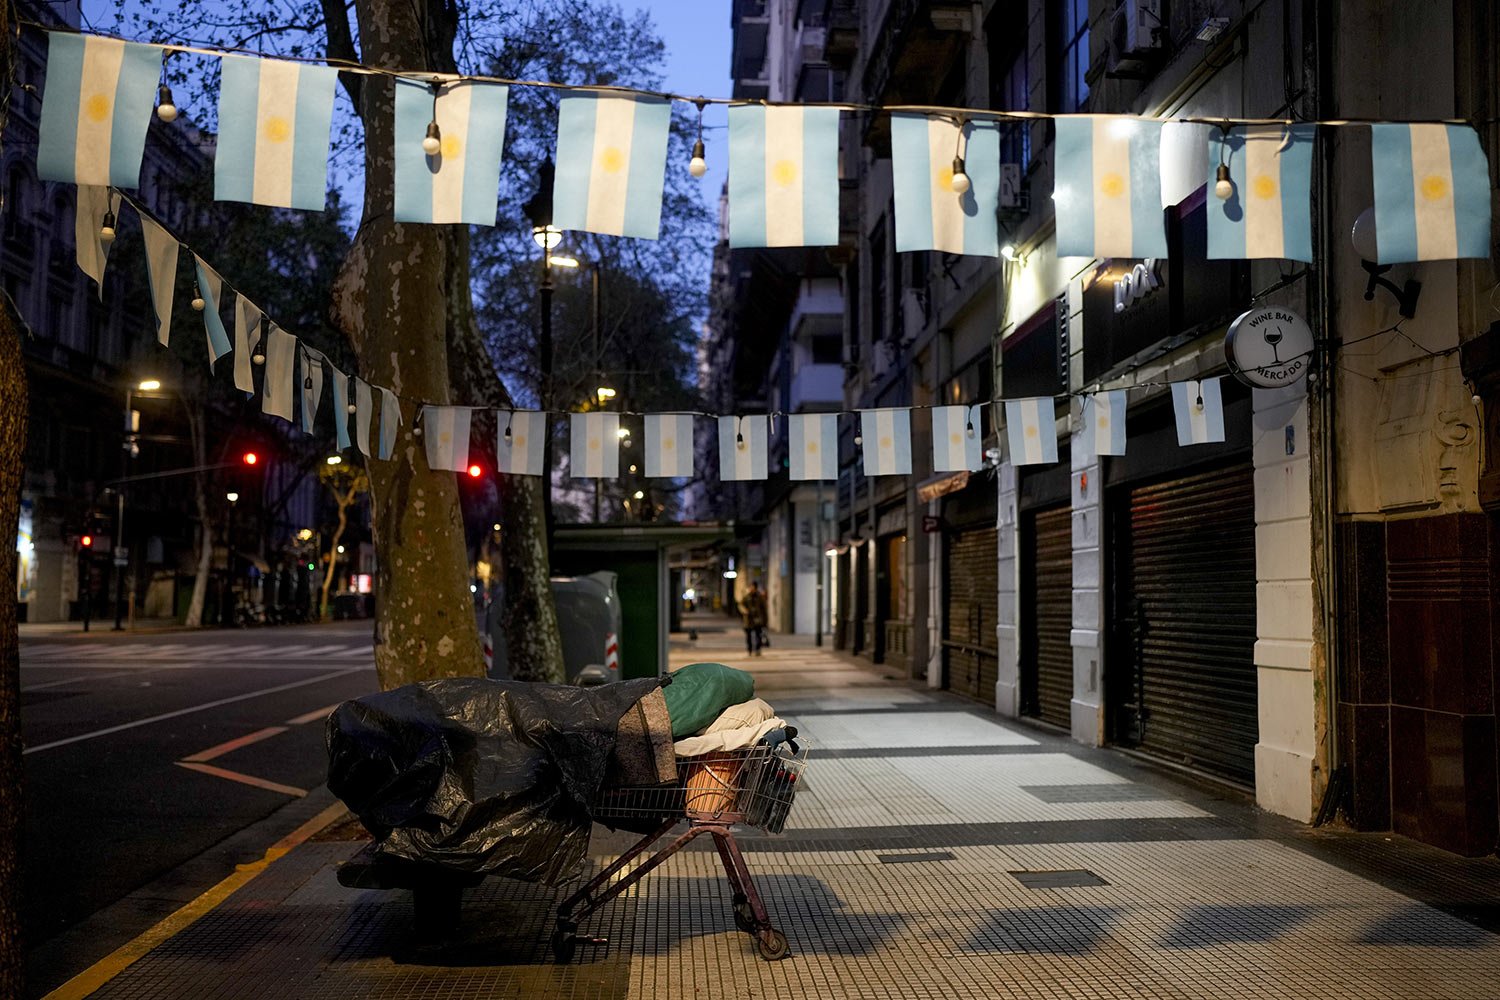  A homeless person sleeps on a bed made of a shopping cart and bench on a sidewalk decorated with Argentine flags in Buenos Aires, Argentina, early Sept. 27, 2023. (AP Photo/Natacha Pisarenko) 